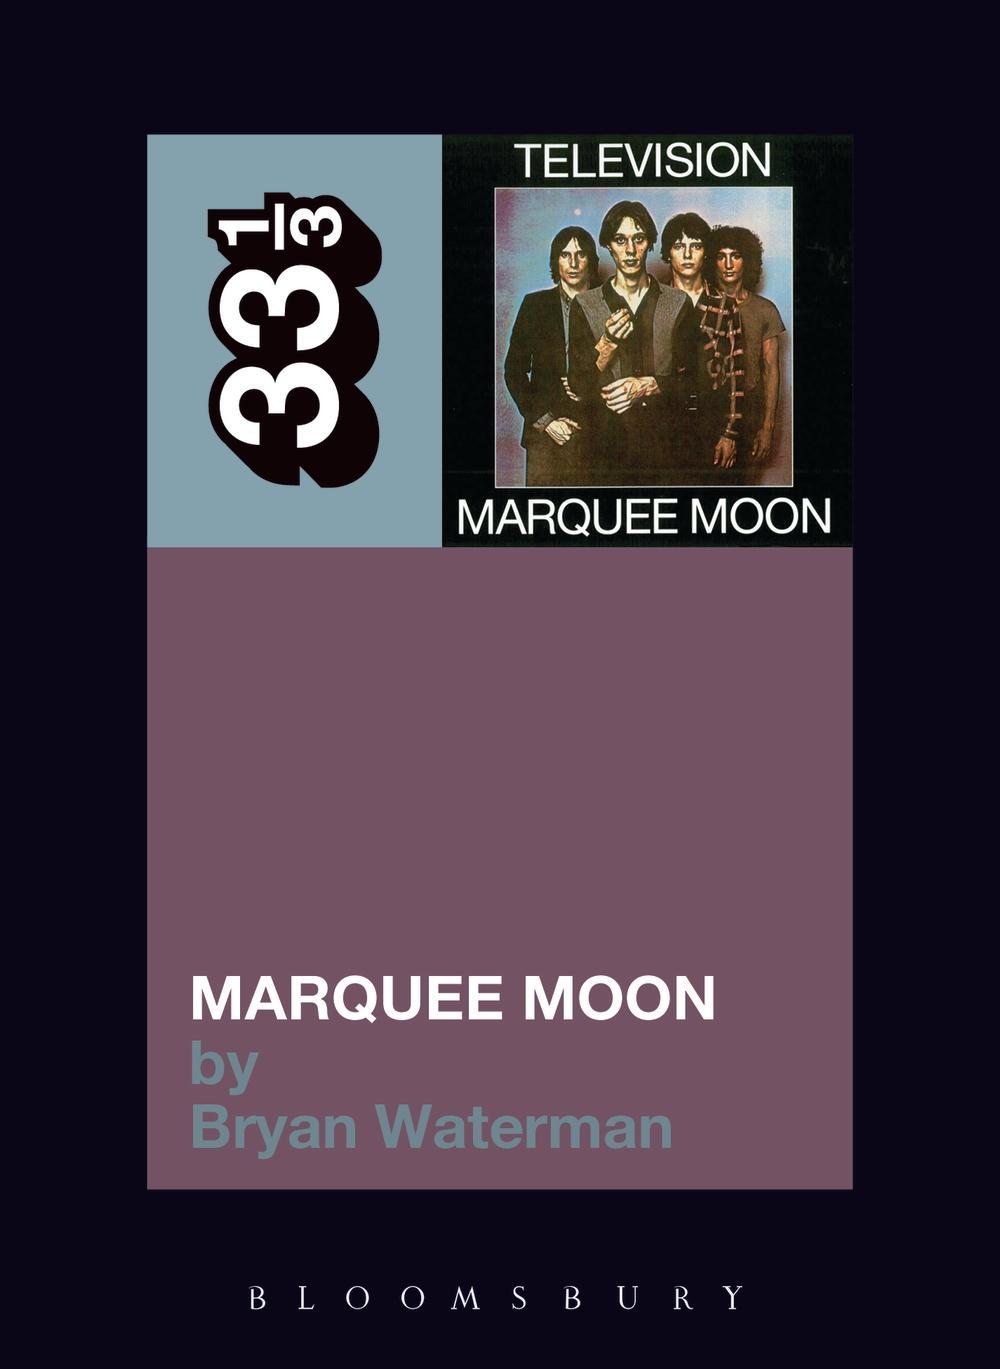 Television's Marquee Moon